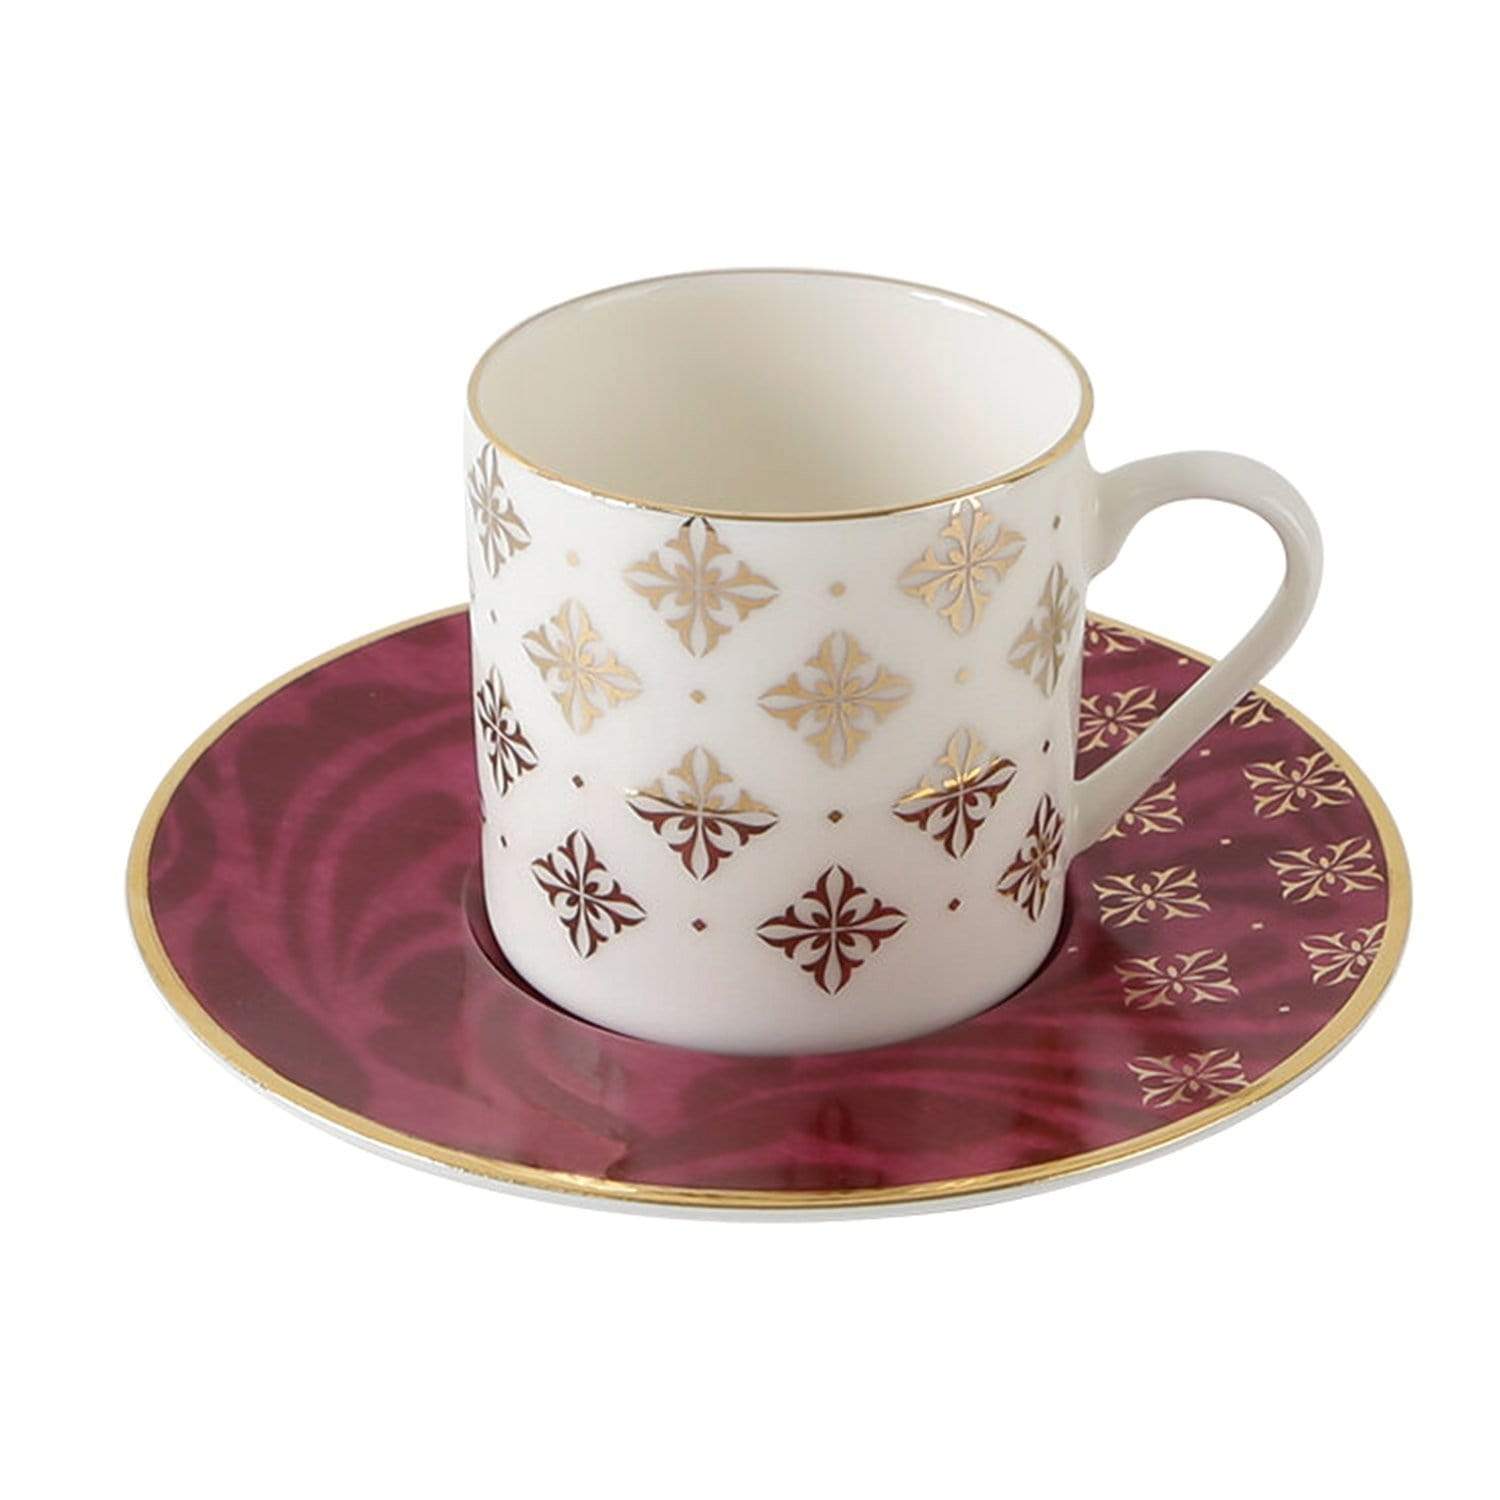 Porland Porselen Evoke Design 4 Coffee Cup and Saucer - White and Pink - 04ALM002751 - Jashanmal Home